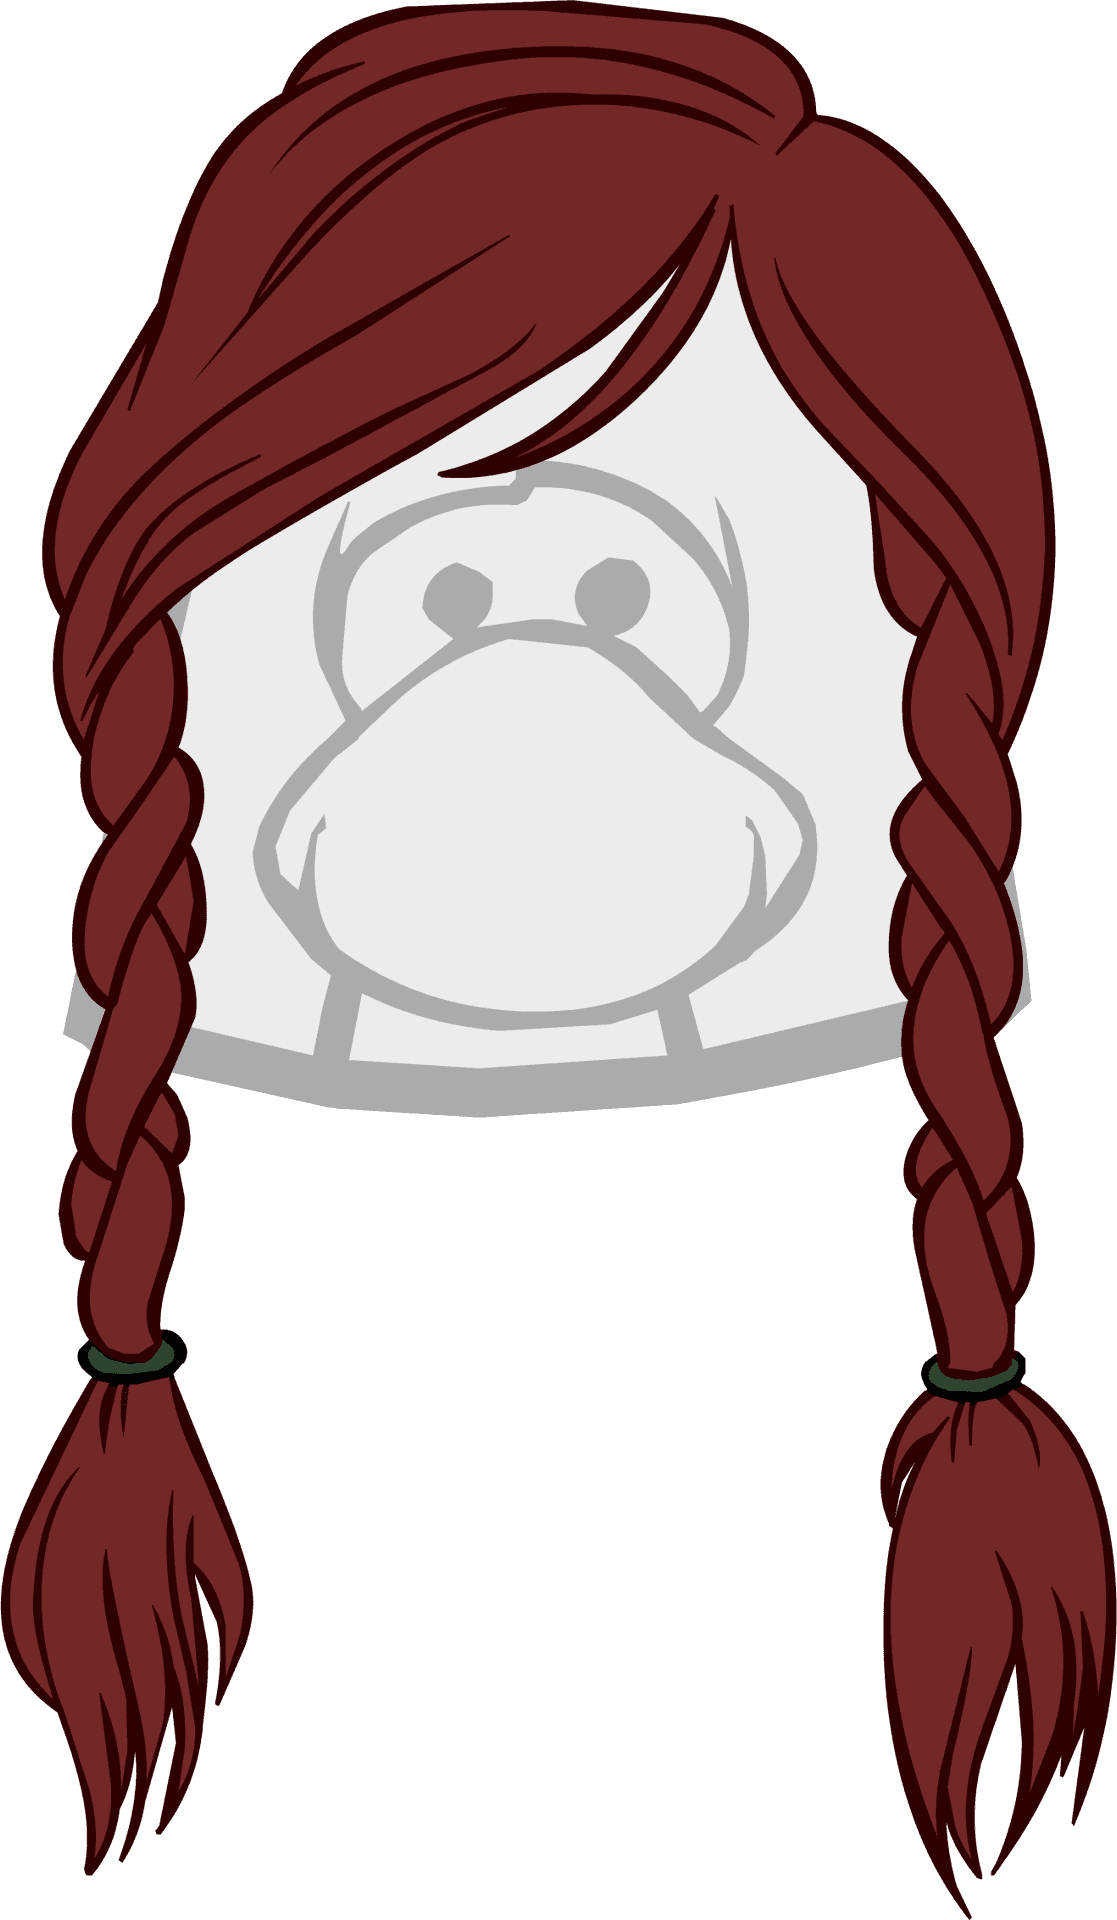 Red Braided Hair Cartoon Face Mask PNG image